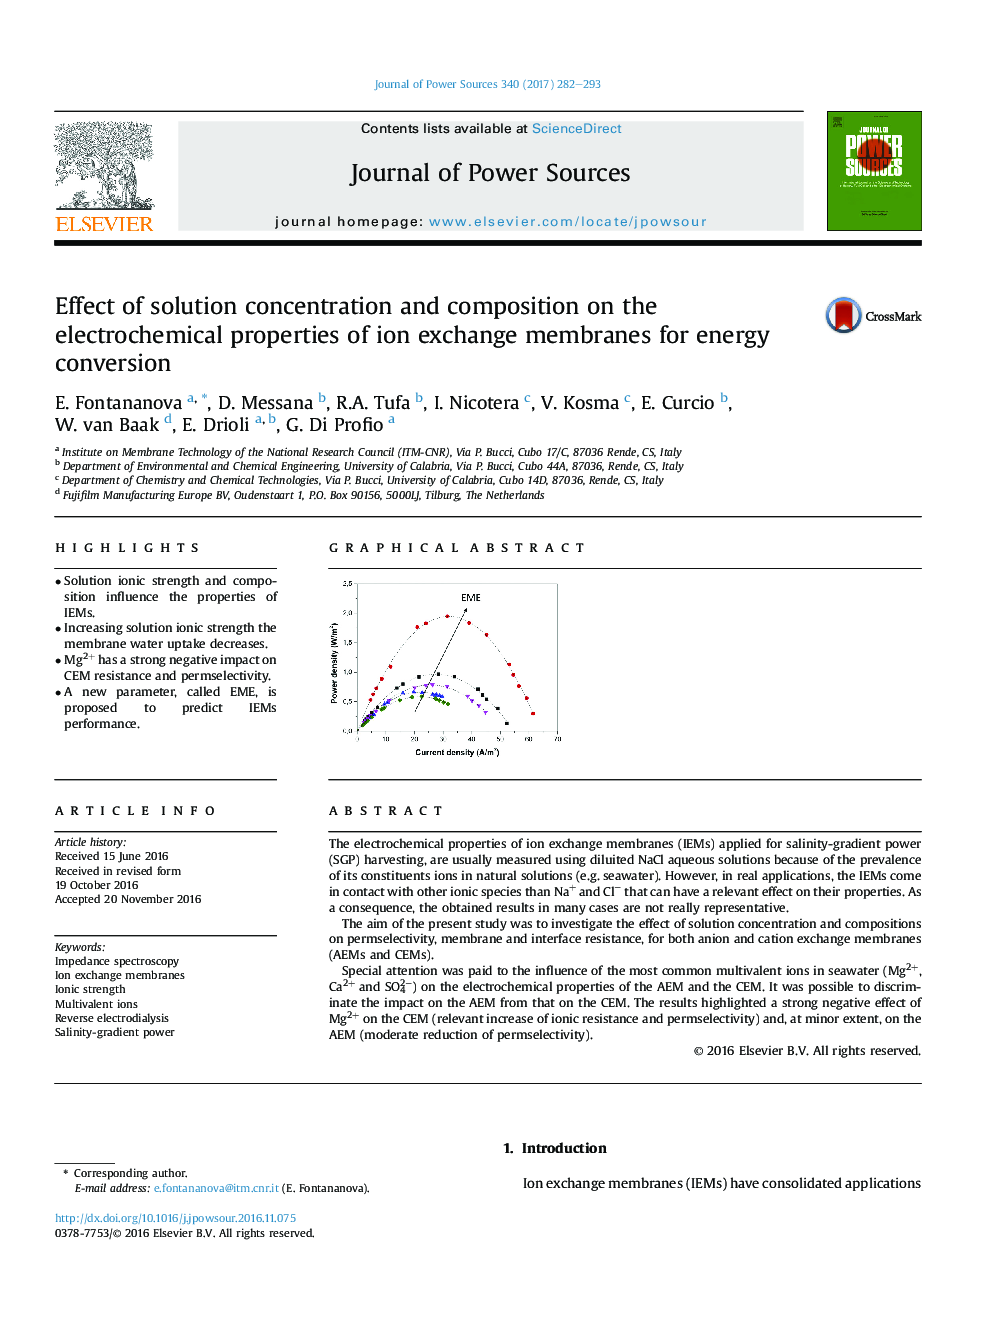 Effect of solution concentration and composition on the electrochemical properties of ion exchange membranes for energy conversion